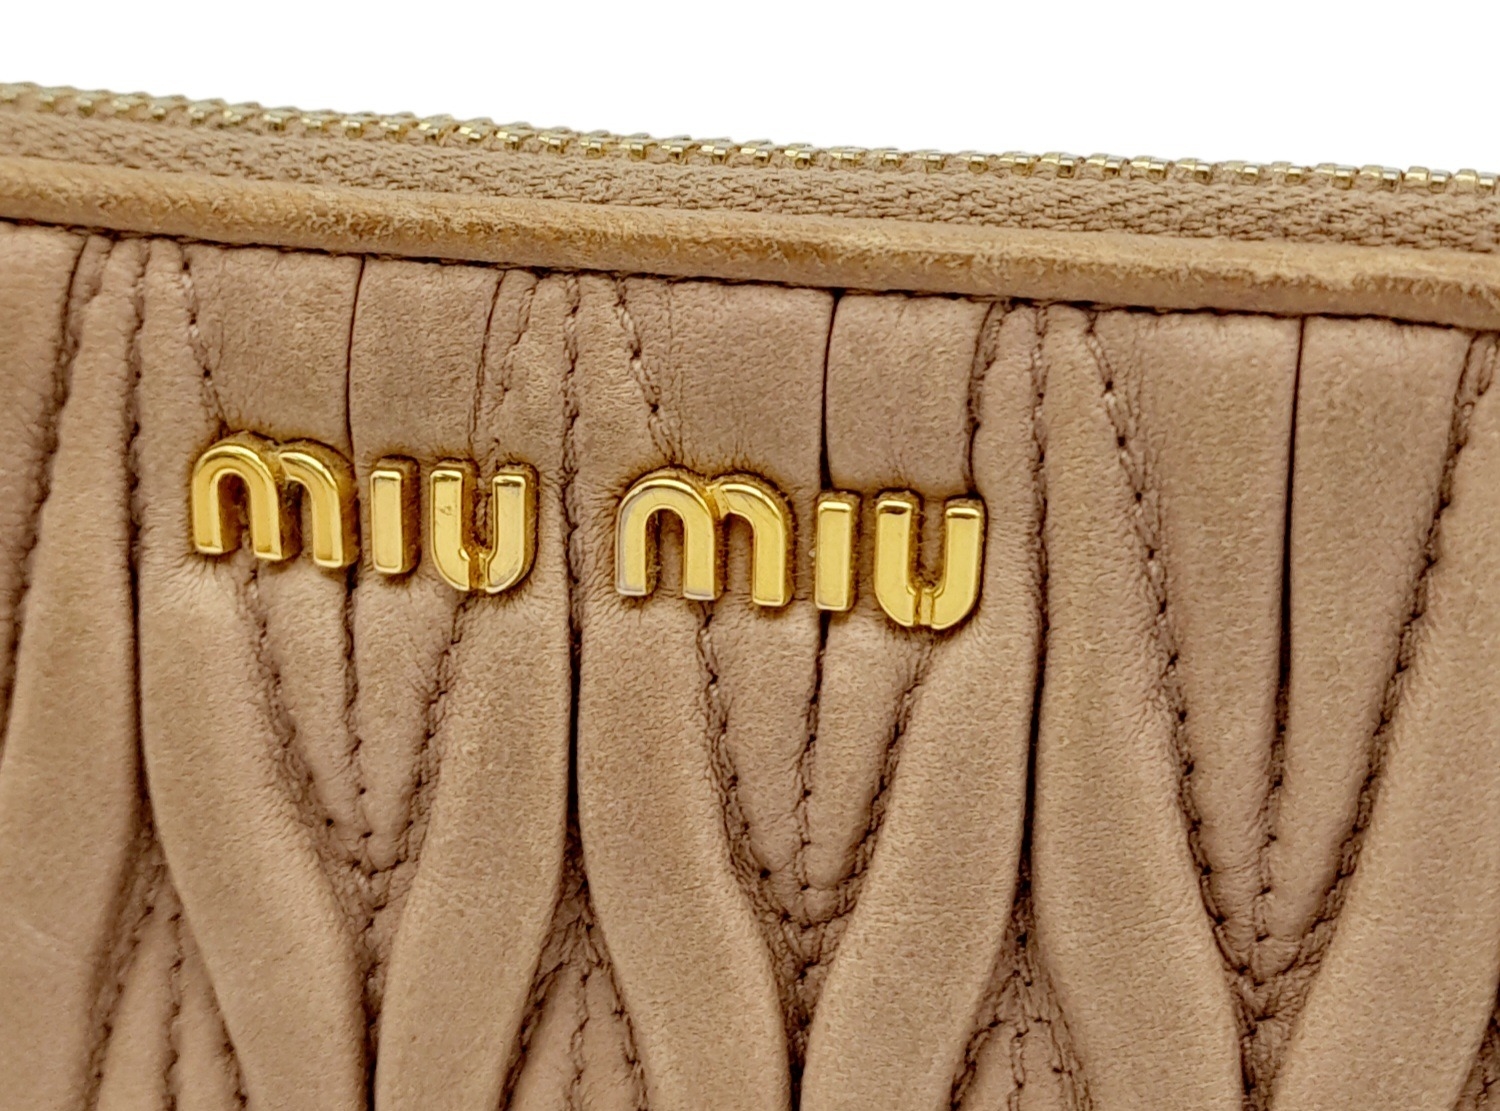 A Miu Miu Dust Pink Purse. Matelassé leather exterior with gold-toned hardware and zipped top - Image 4 of 10